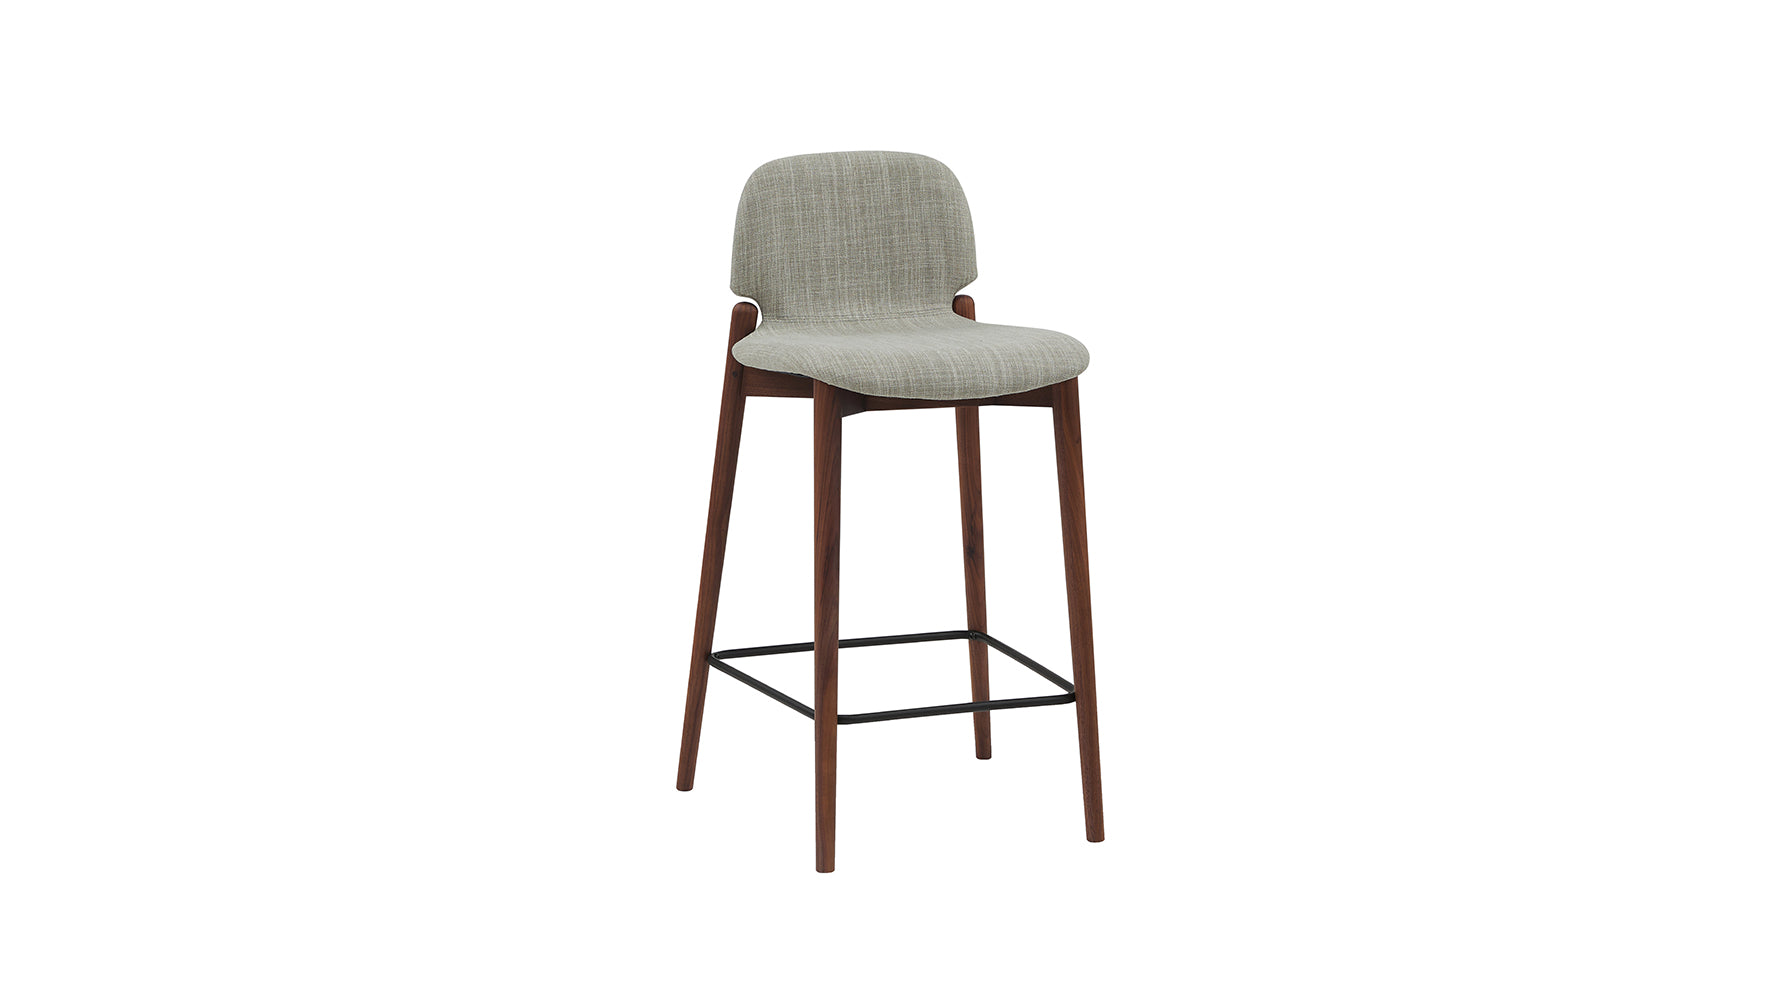 Dine In Stool, Counter, Walnut/Taupe Fabric - Image 2